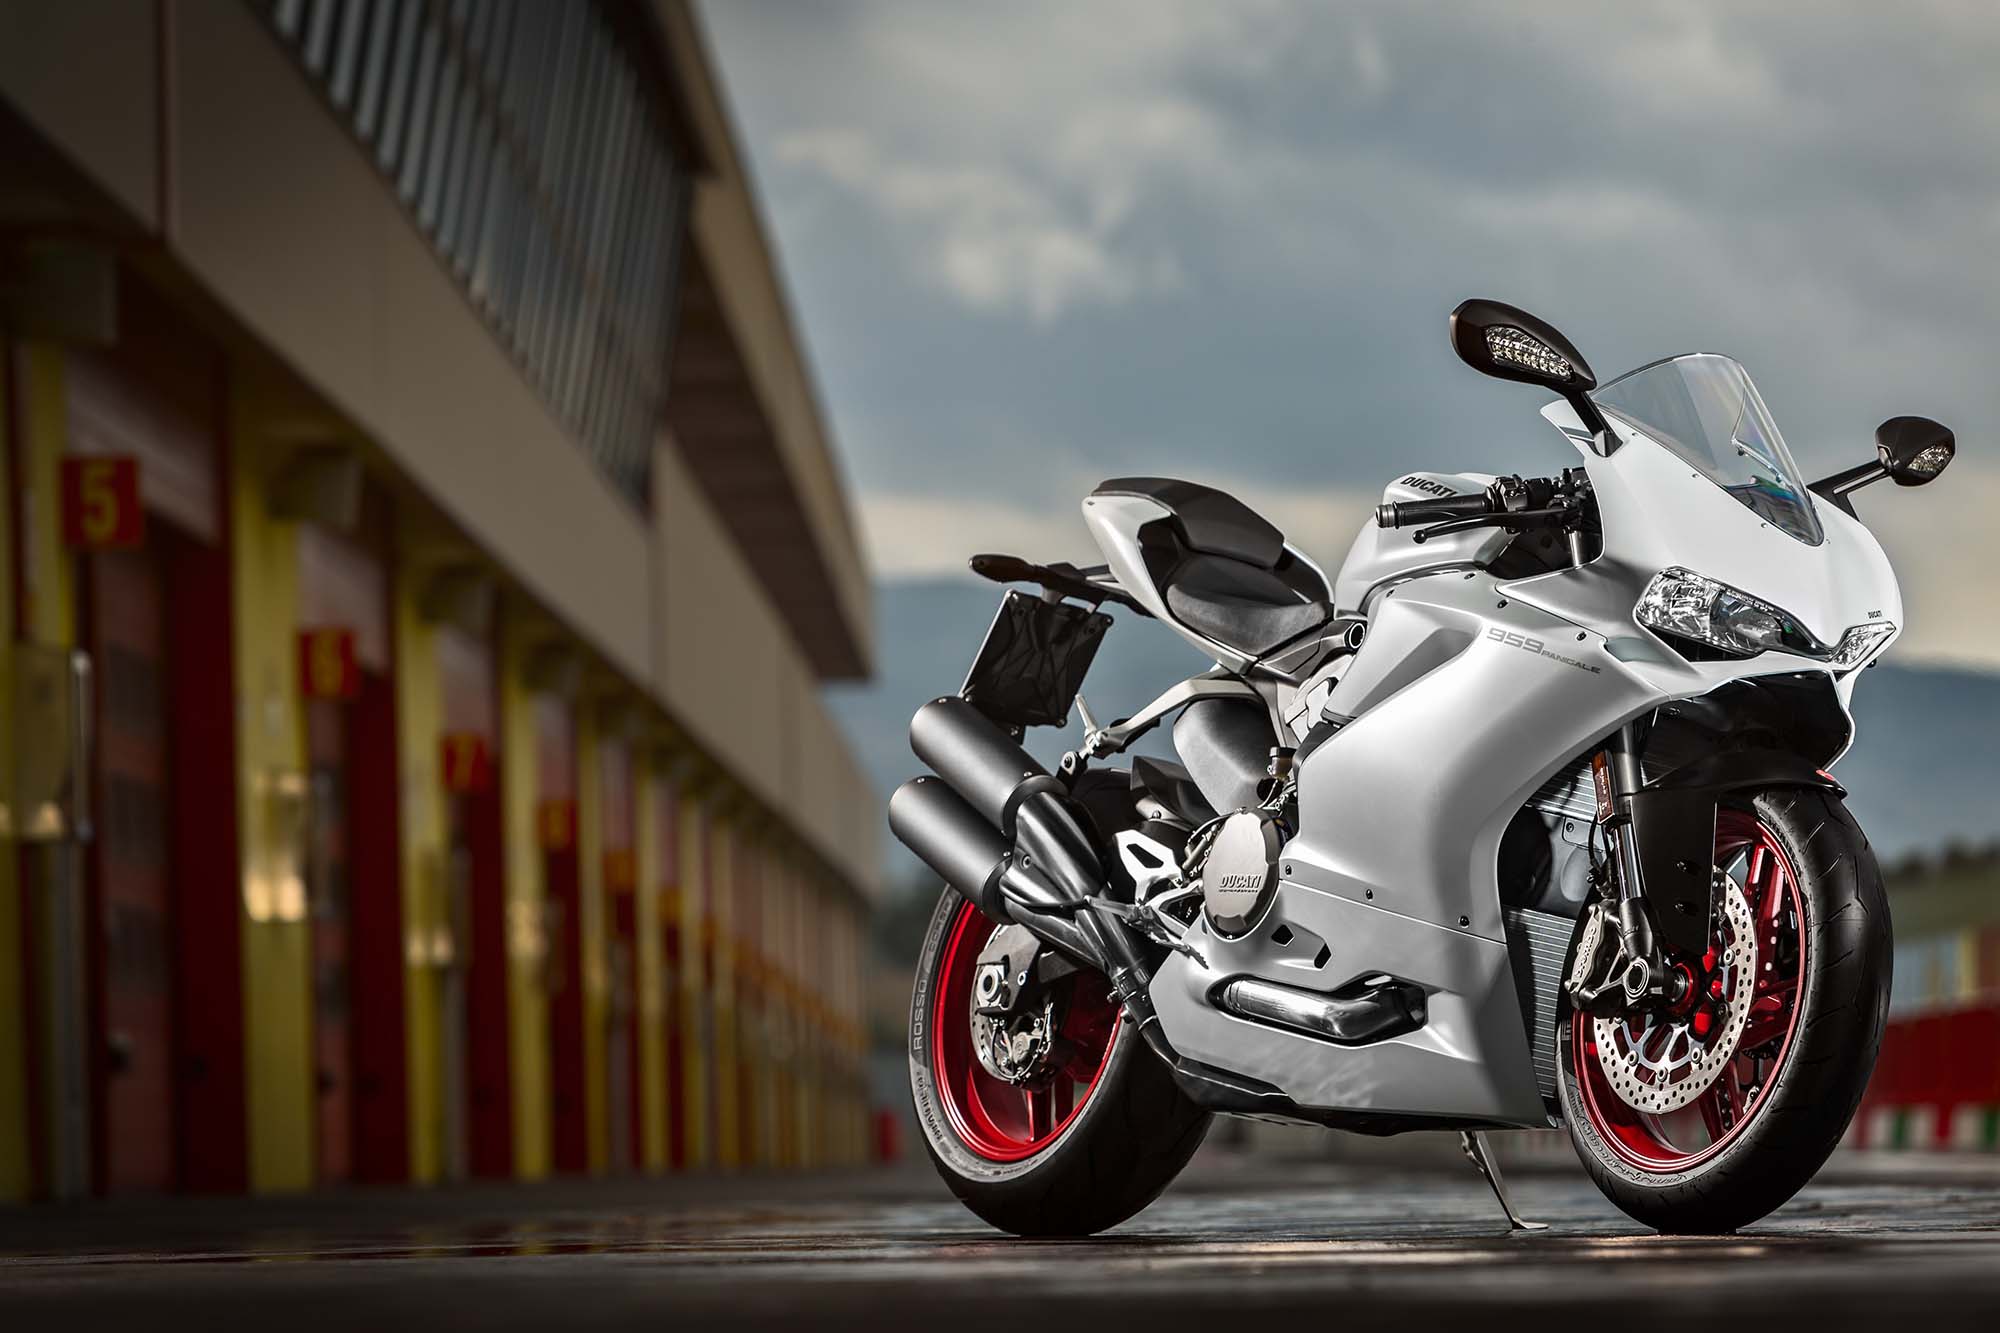 2016 Ducati 959 Panigale Comes with a Shotgun Exhaust*